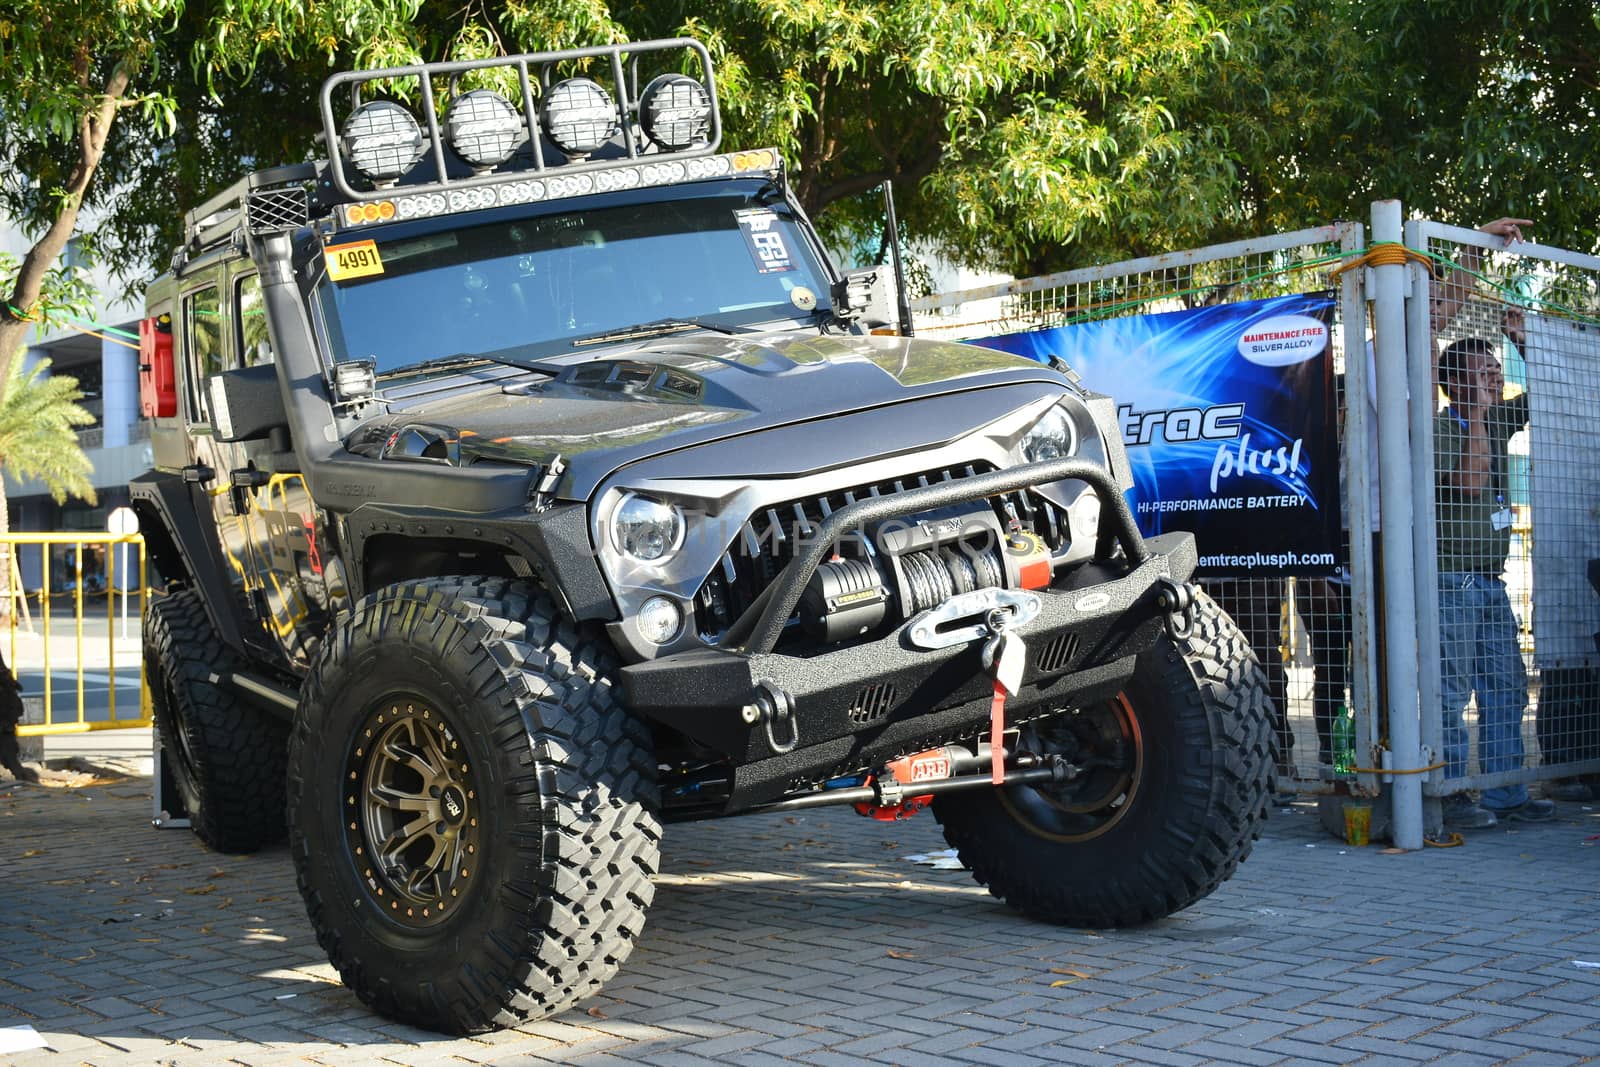 PASAY, PH - DEC 8 - Jeep wrangler at Bumper to Bumper car show on December 8, 2018 in Pasay, Philippines.